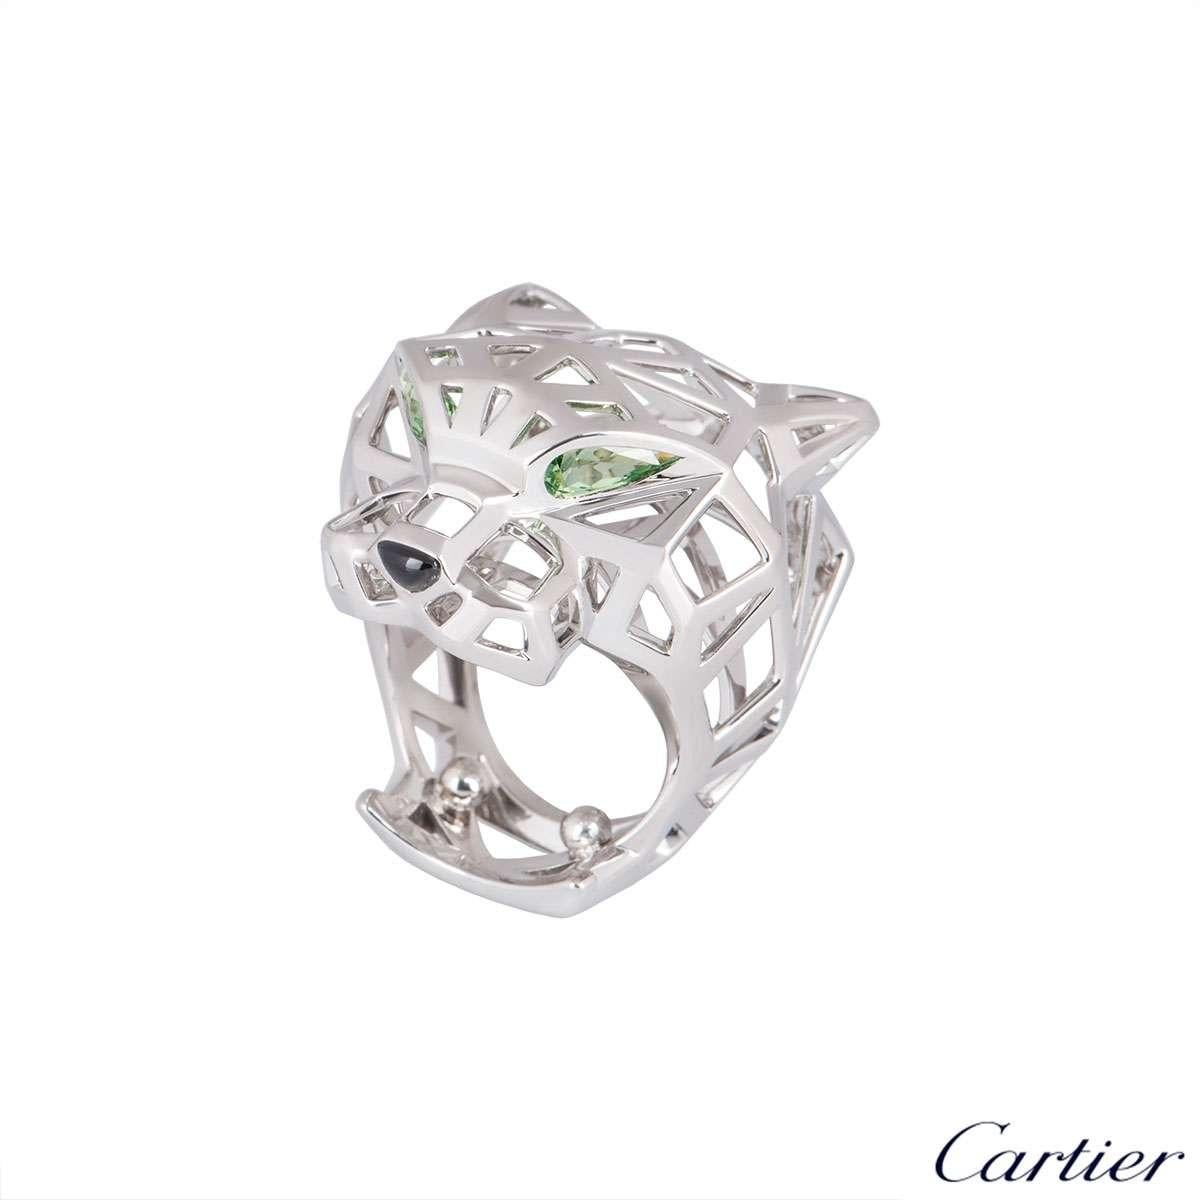 An exemplary 18k white gold Cartier dress ring from the Panthere De Cartier collection. The ring comprises of an open work panther motif with 2 pear cut tsavorite garnets featured as the eyes and an onyx nose. The ring was originally a size 53 (US